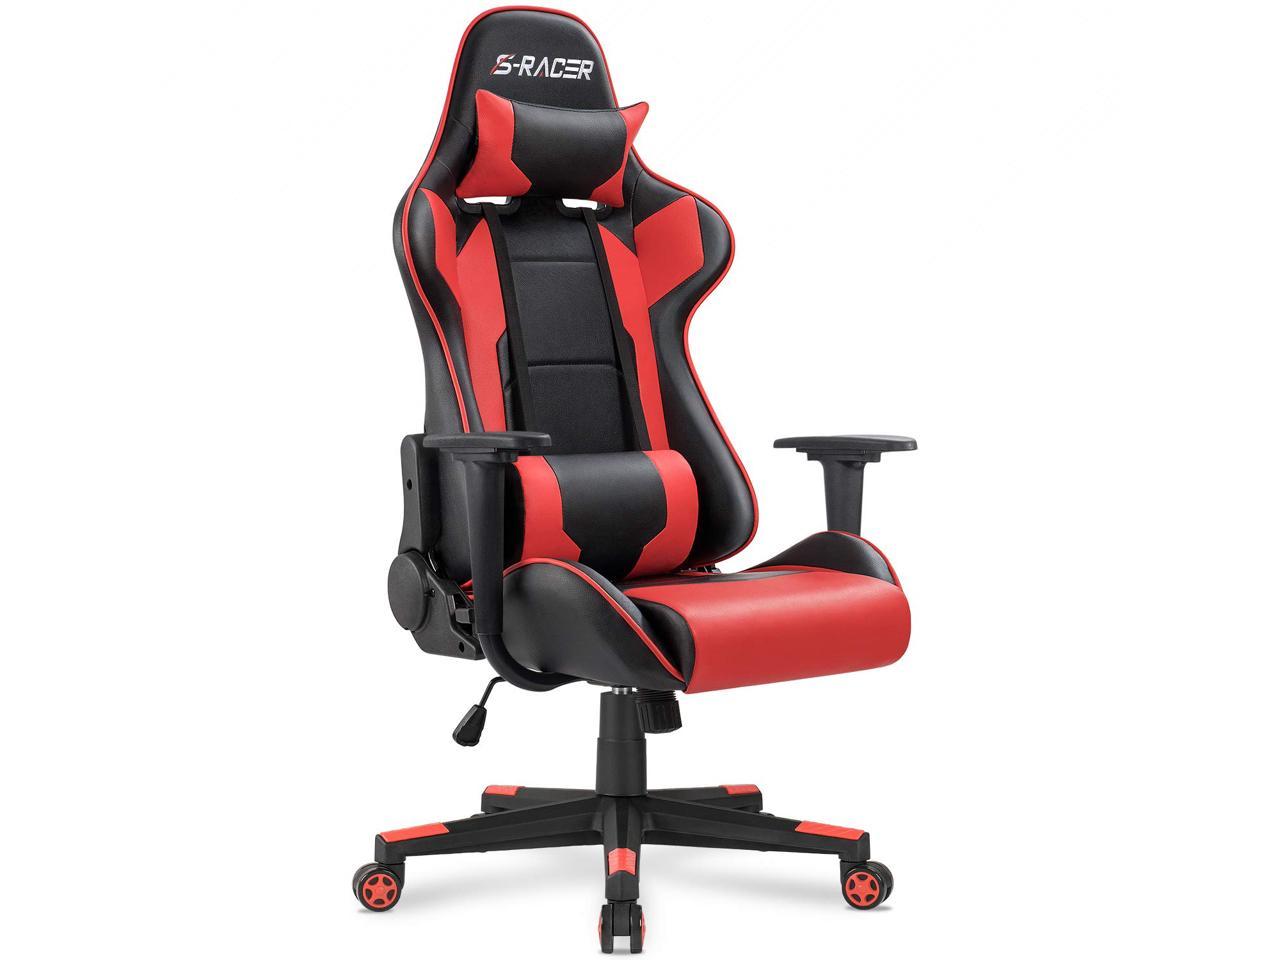 Homall Gaming Chair Office Chair High Back Computer Chair Pu Leather Desk Chair Racing Executive Ergonomic Swivel Task Chair Seat Height Adjustable With Headrest And Lumbar Support Red Newegg Com